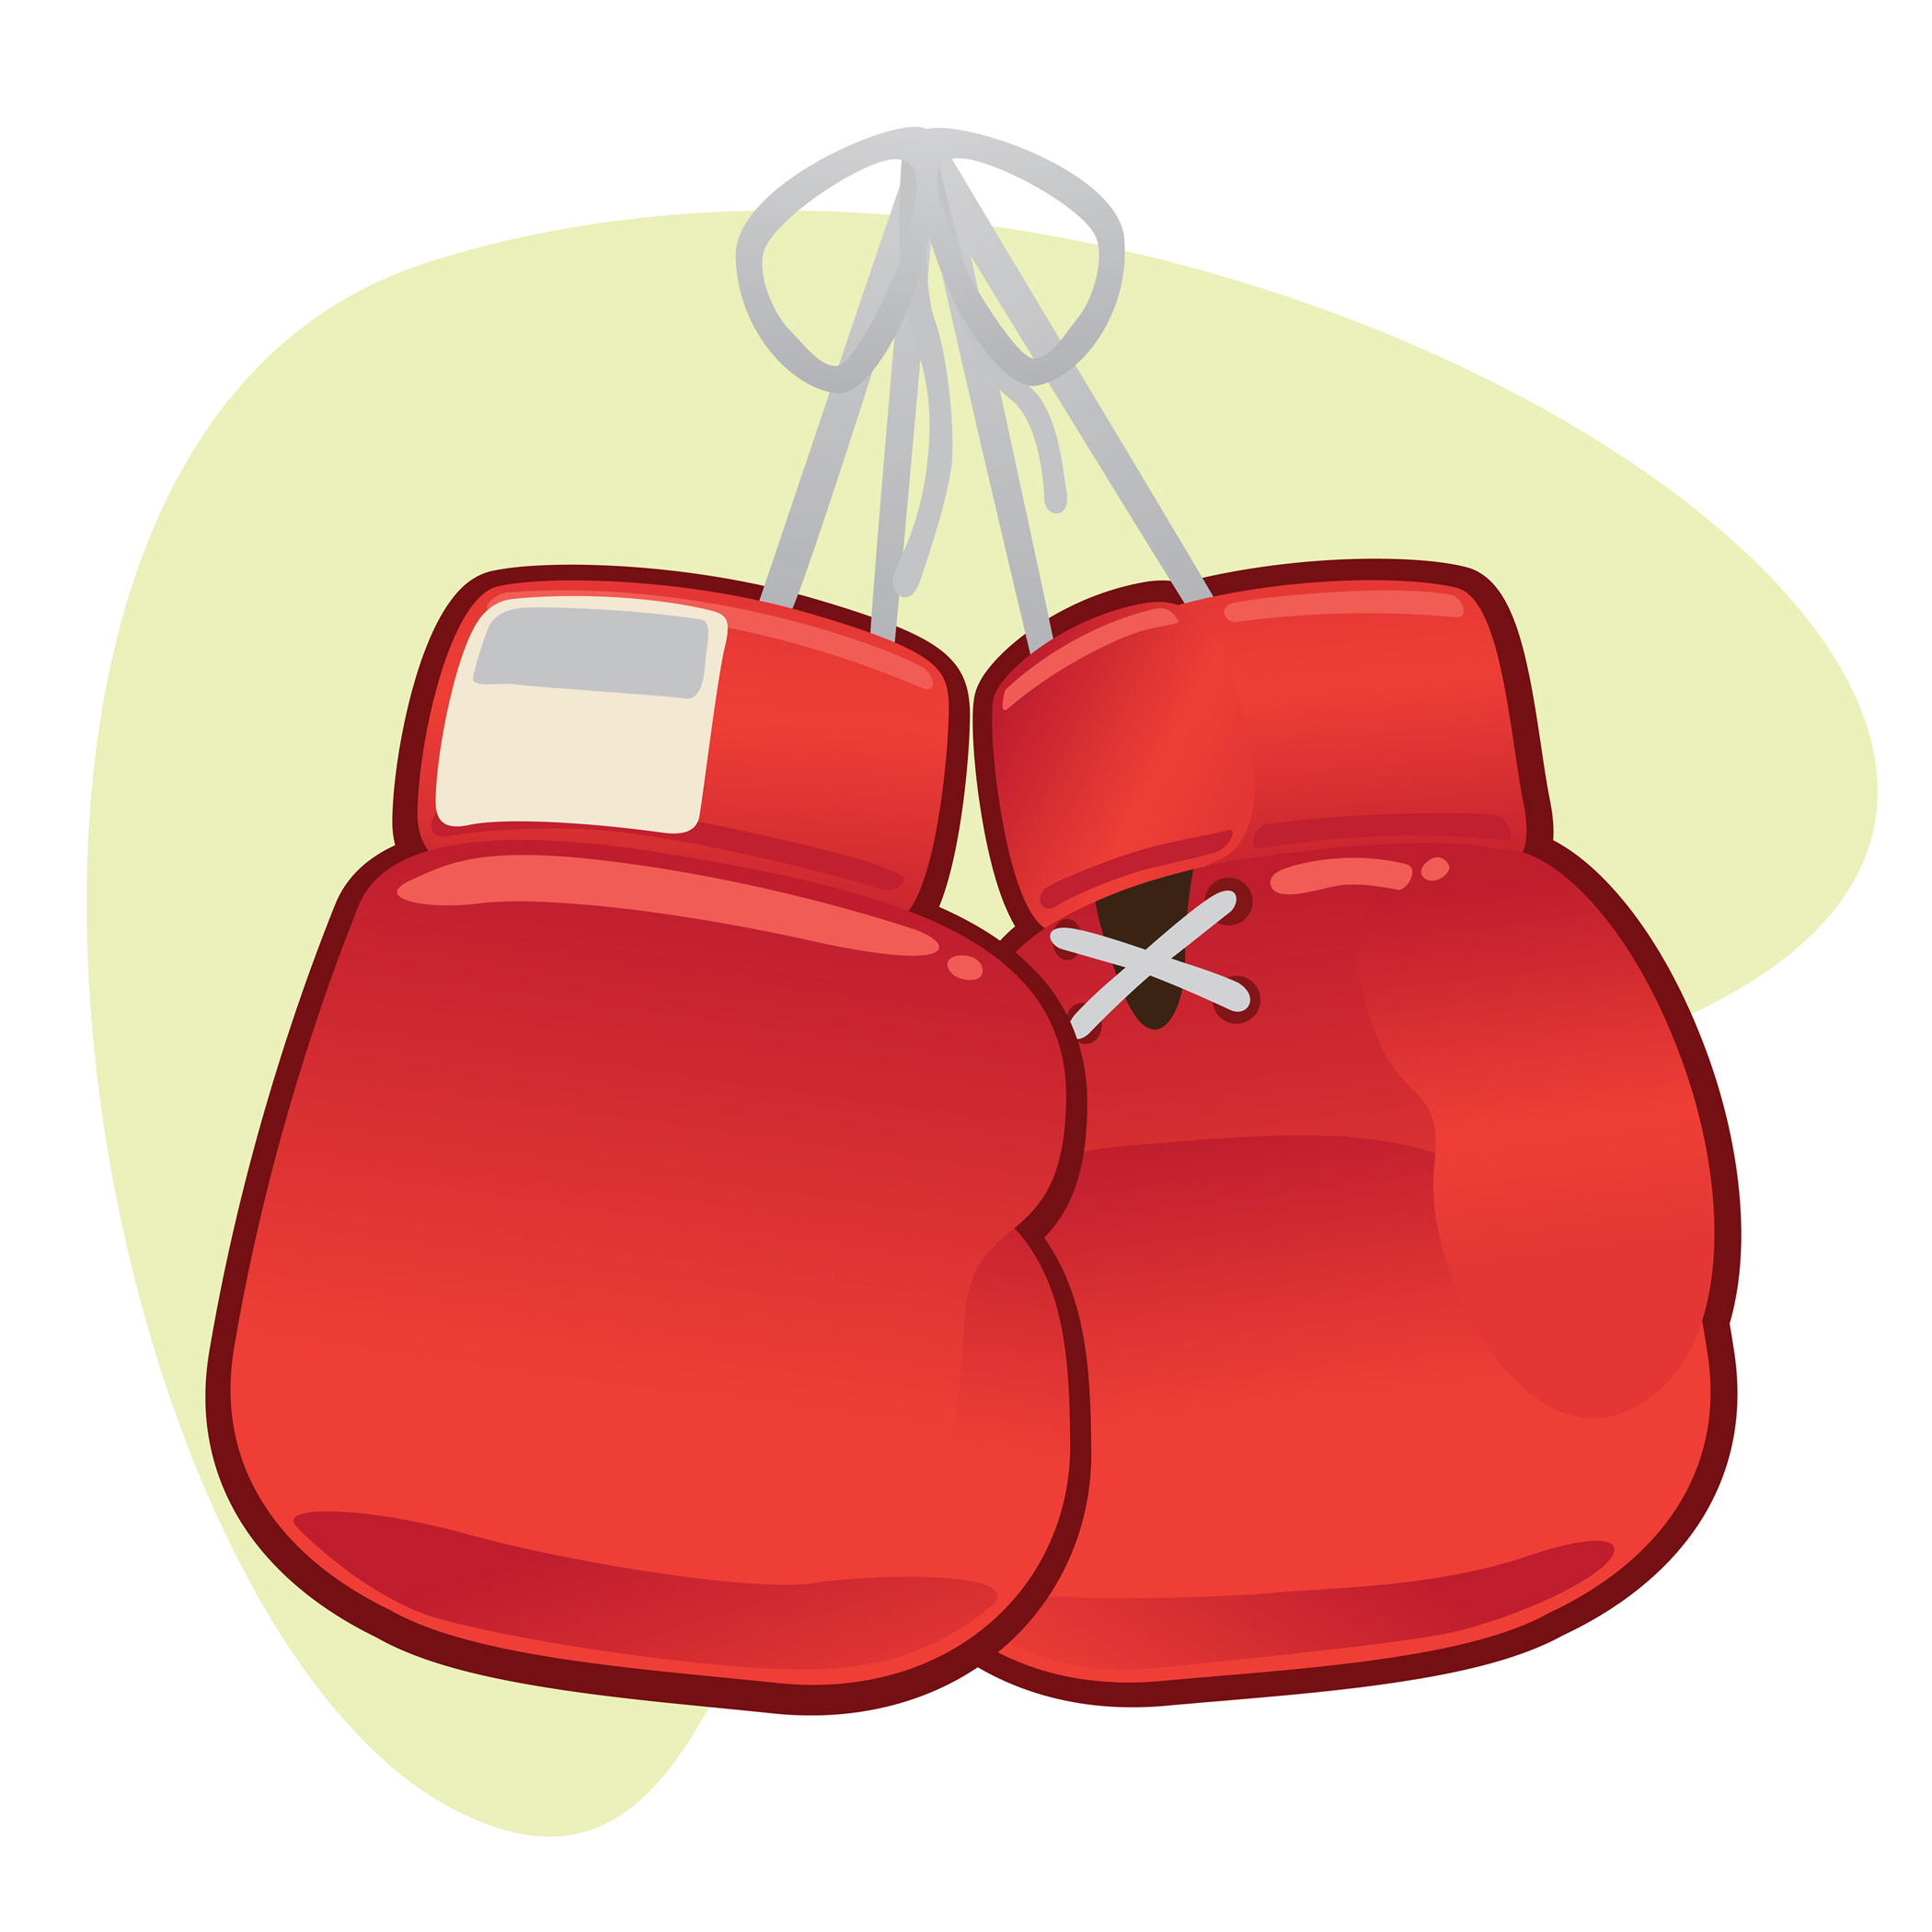 Images For > Boxing Glove Punch Clip Art